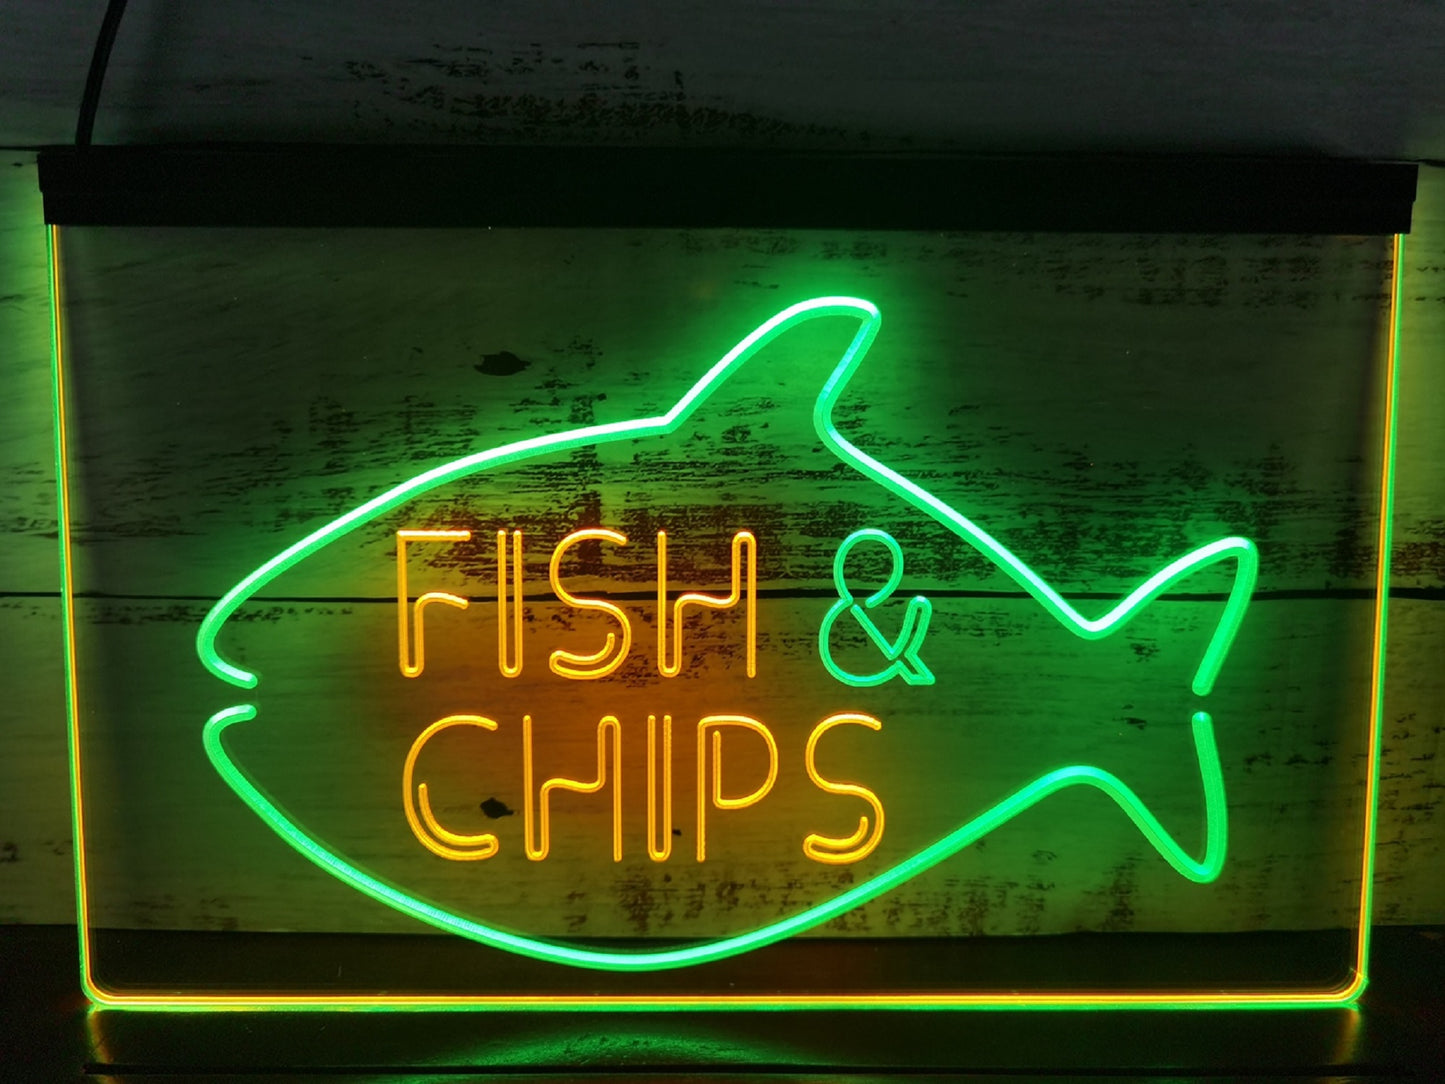 Neon Sign Dual Color Fish & Chips Restaurant Wall Hanging Desk Top Decor